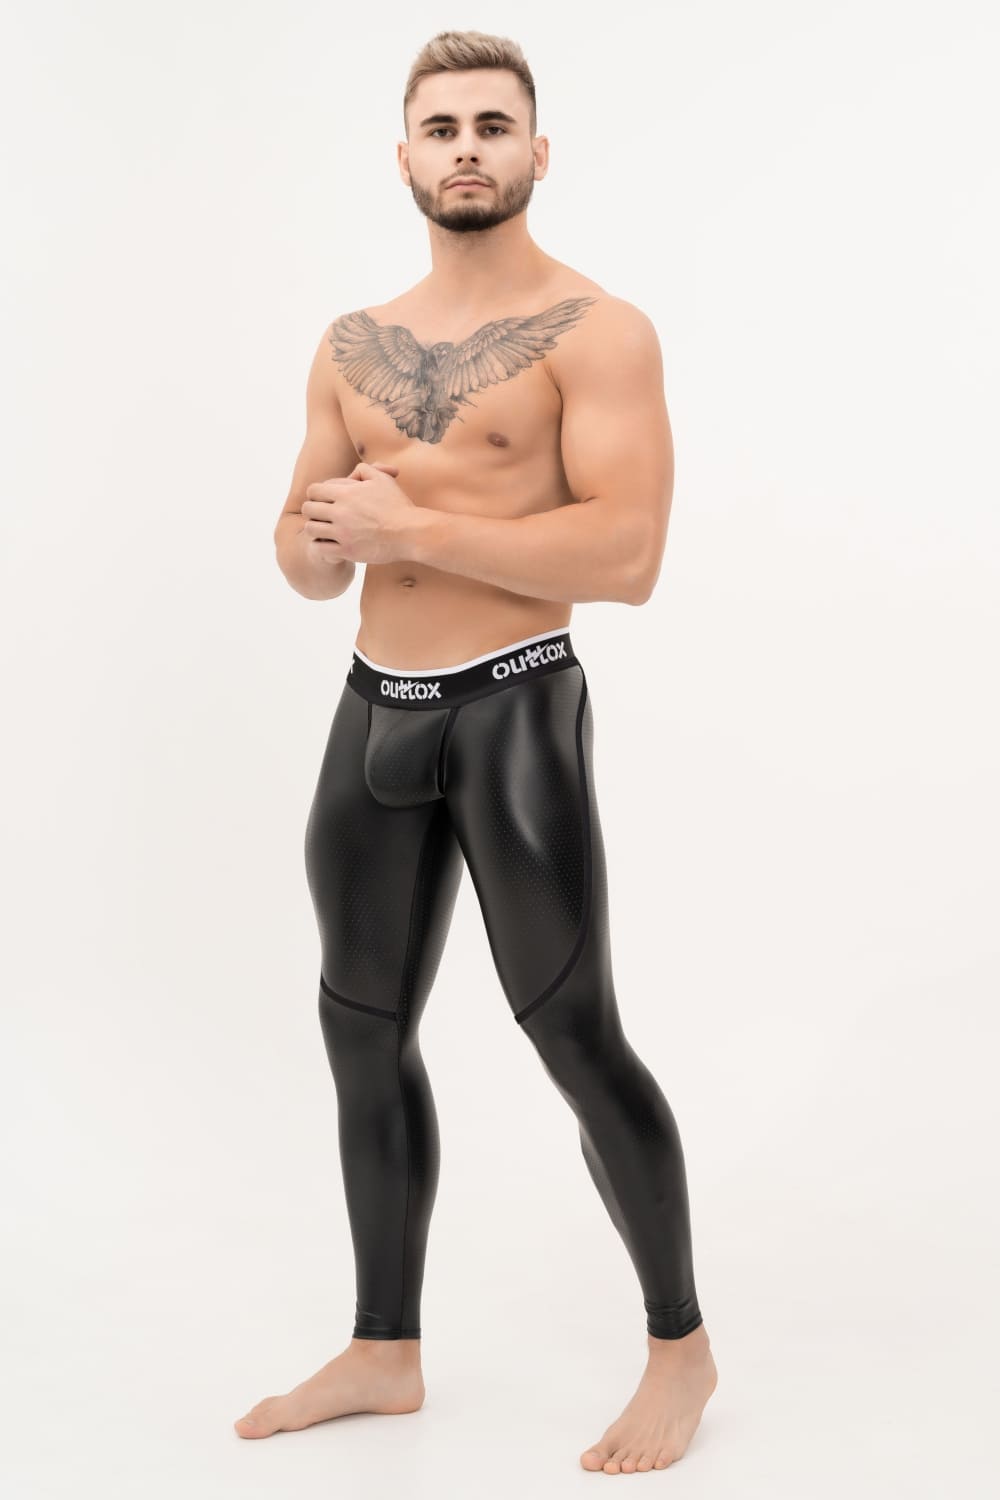 Outtox. Zip-Rear Leggings with Snap Codpiece. Black